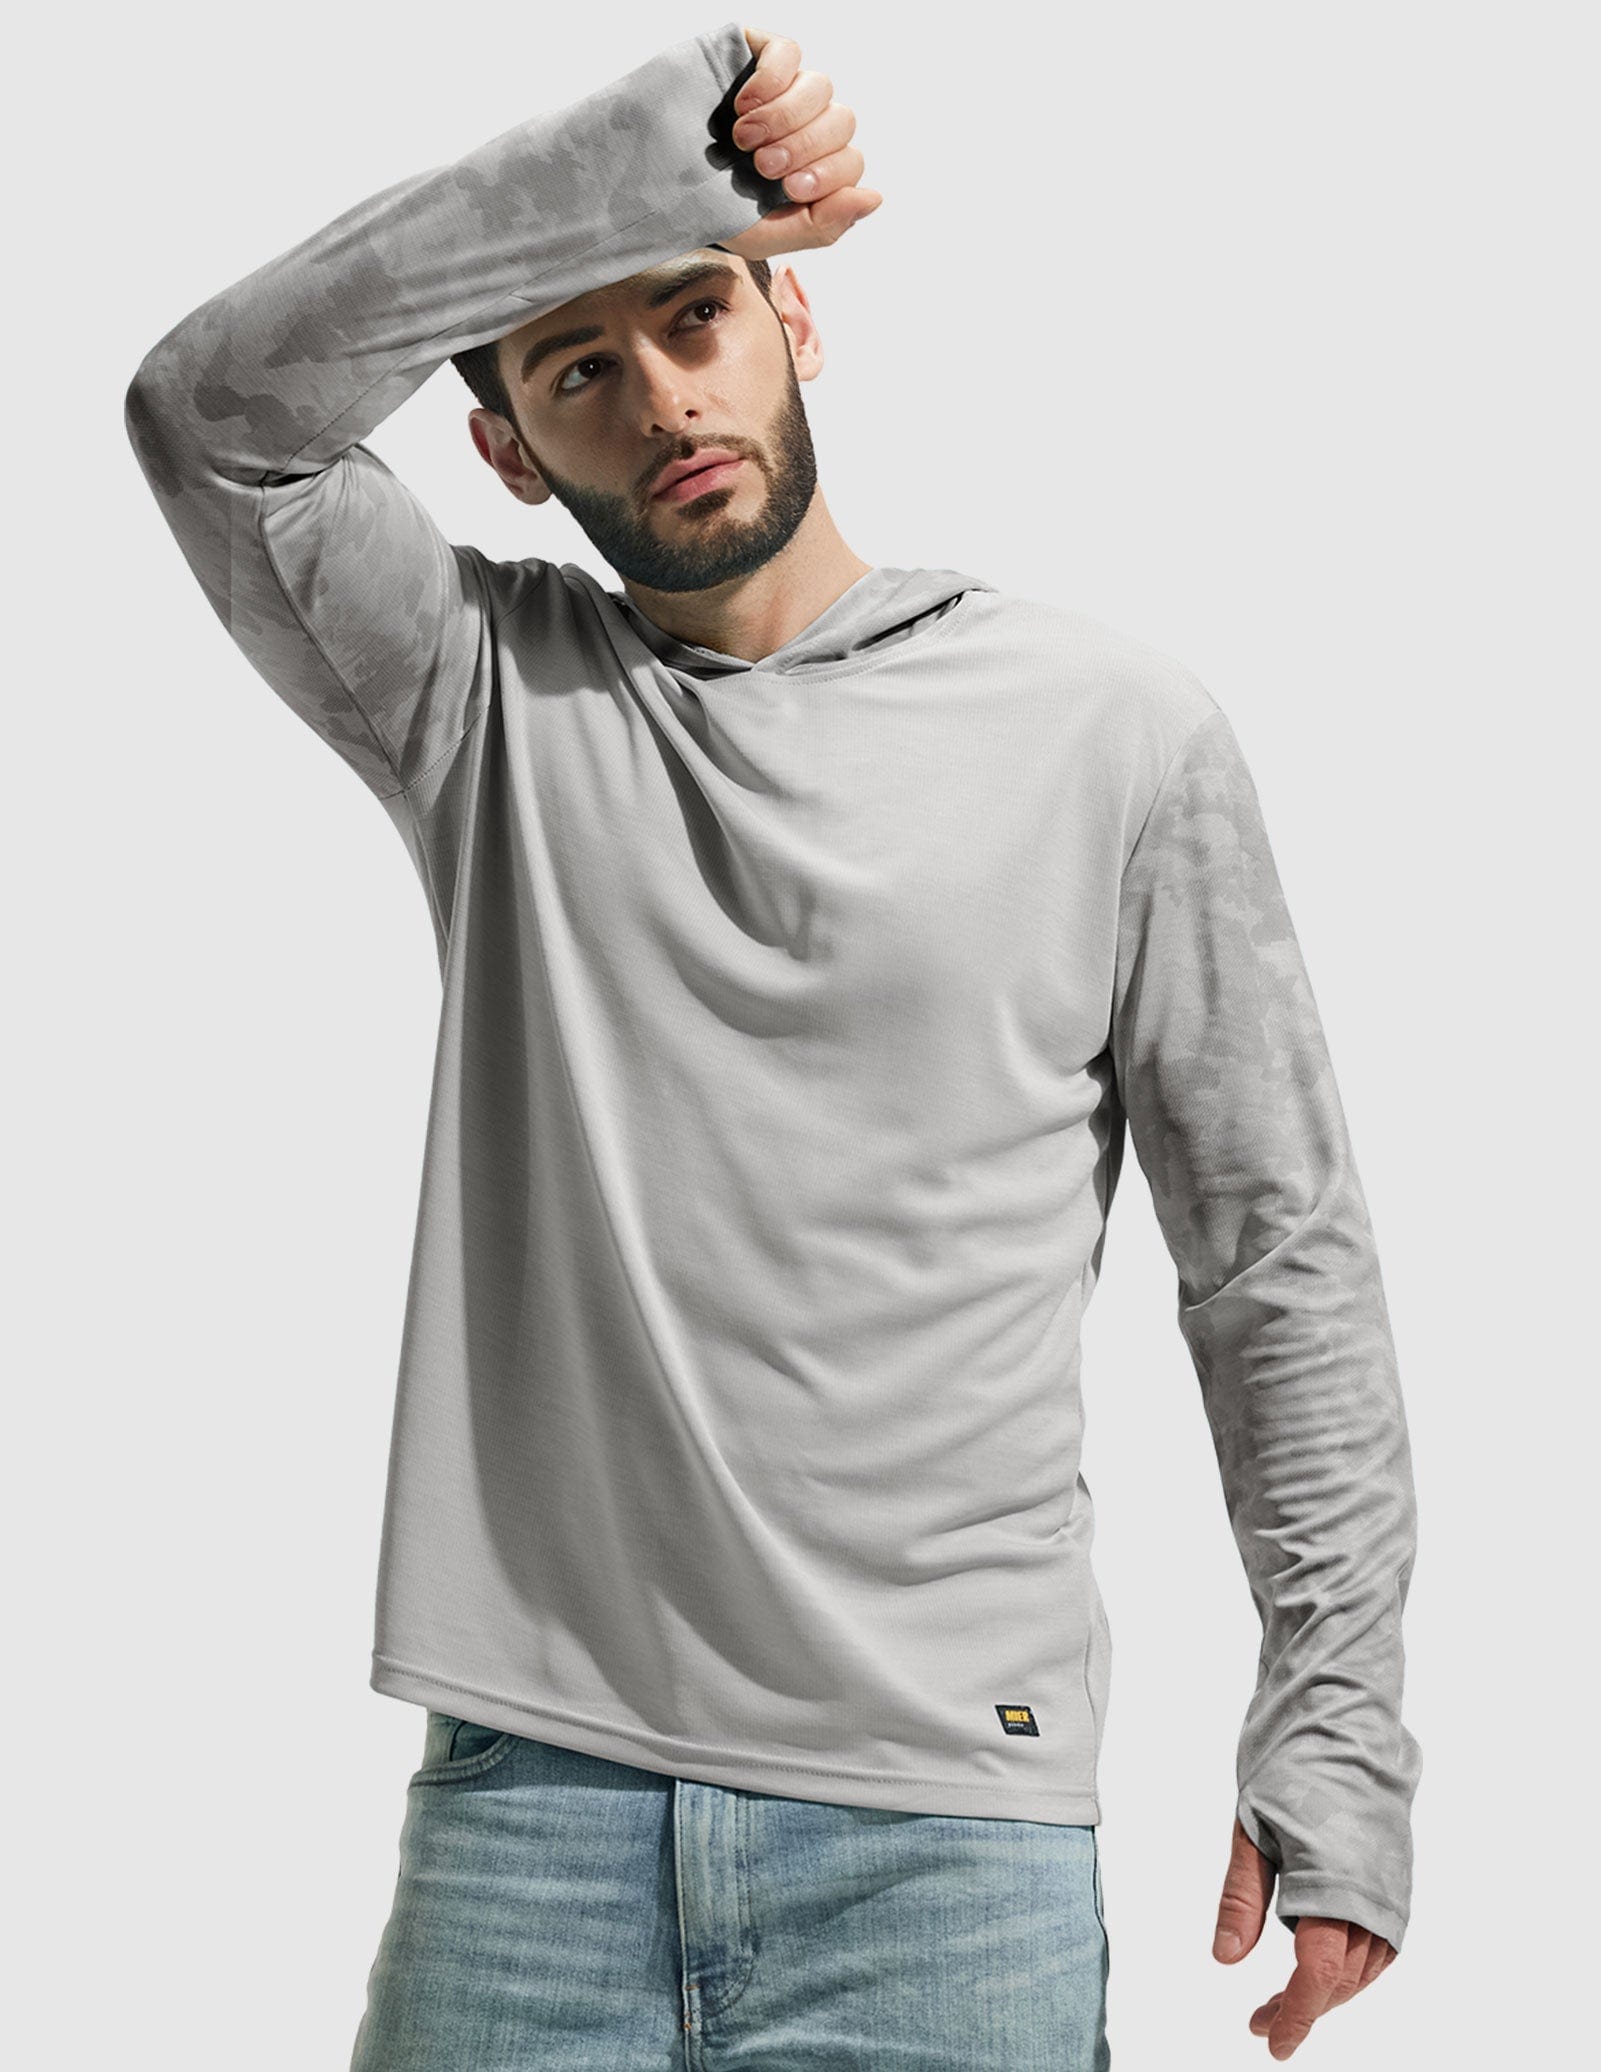 Men's UPF 50+ Sun Protection Hoodie SPF Shirts with Thumbhole Men Shirts MIER